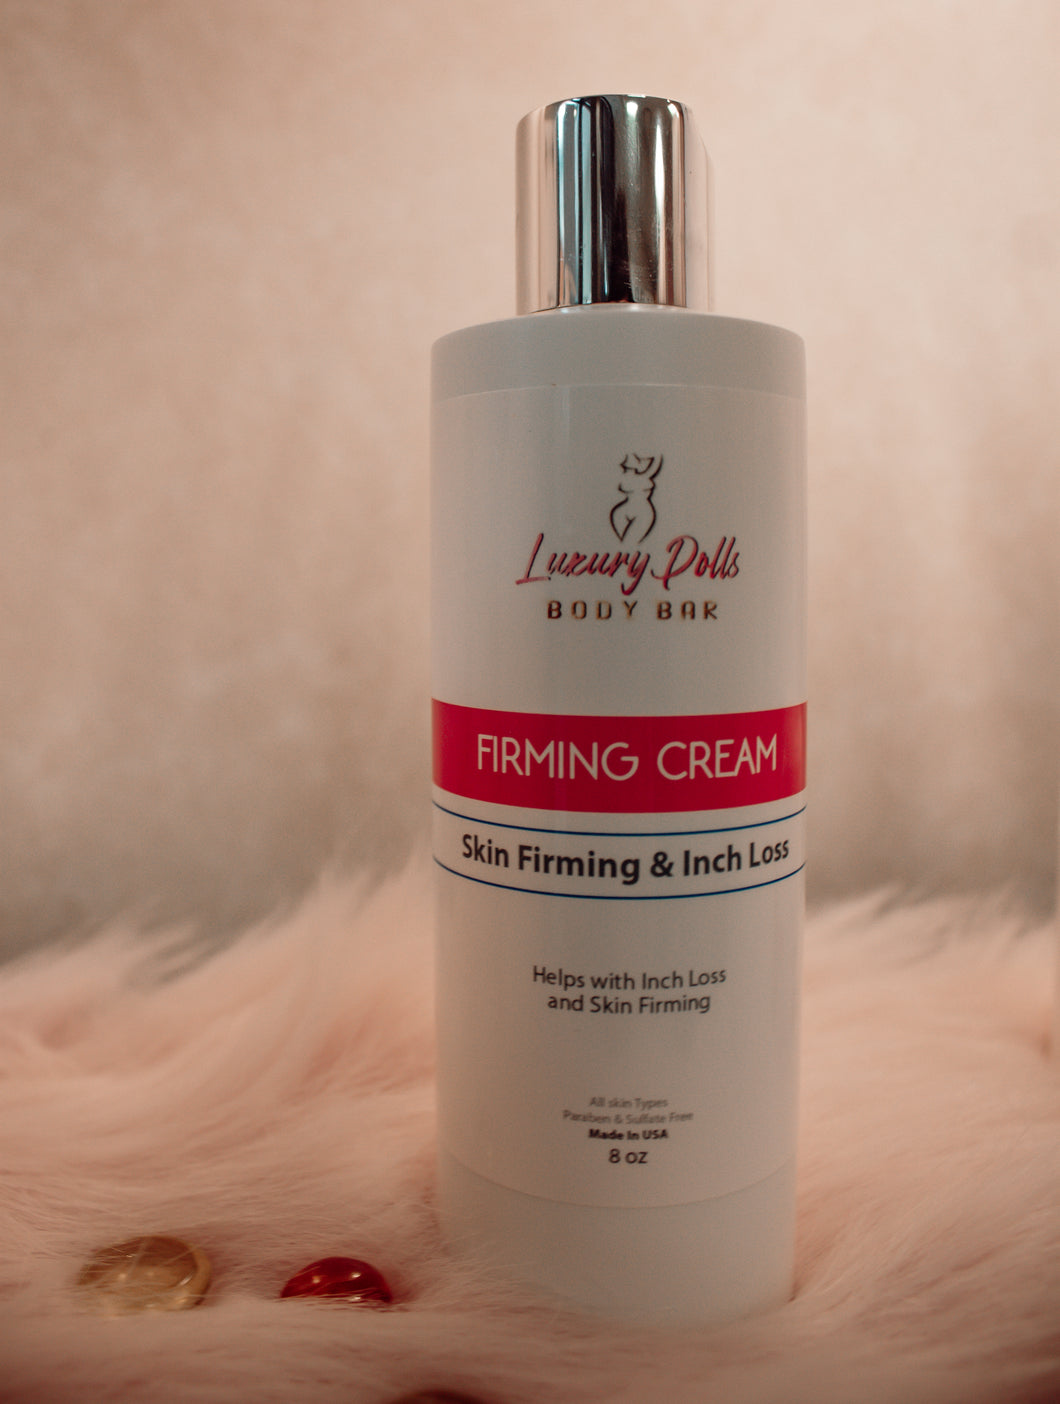 The Lux Firming Cream